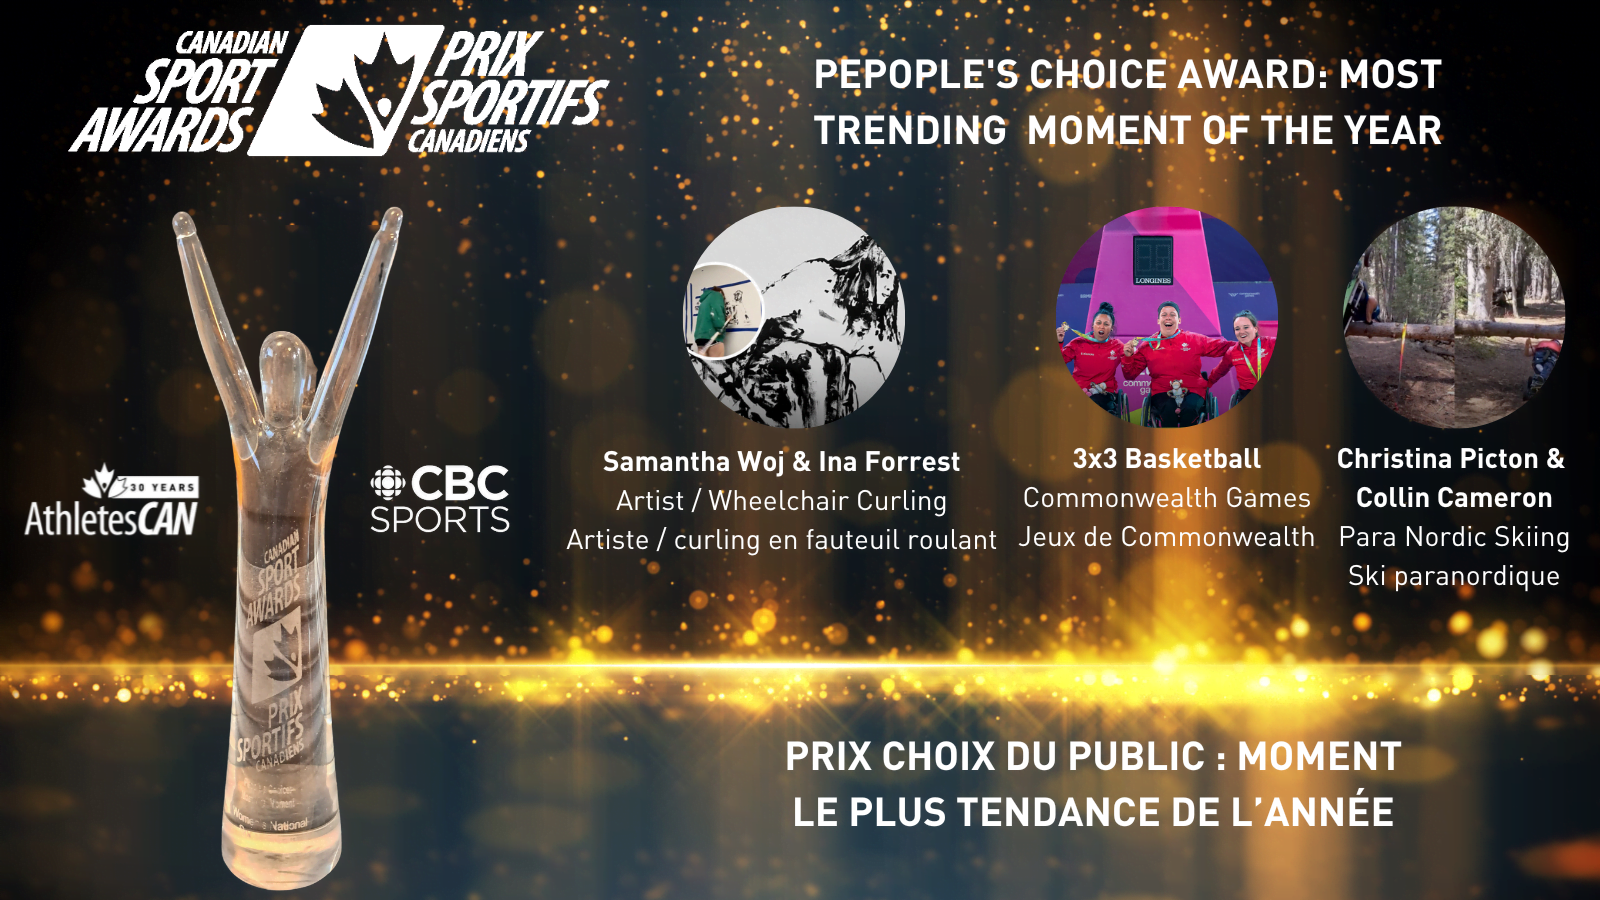 Most Trending Moment of Year digital campaign kicks off 45th Canadian Sport Awards